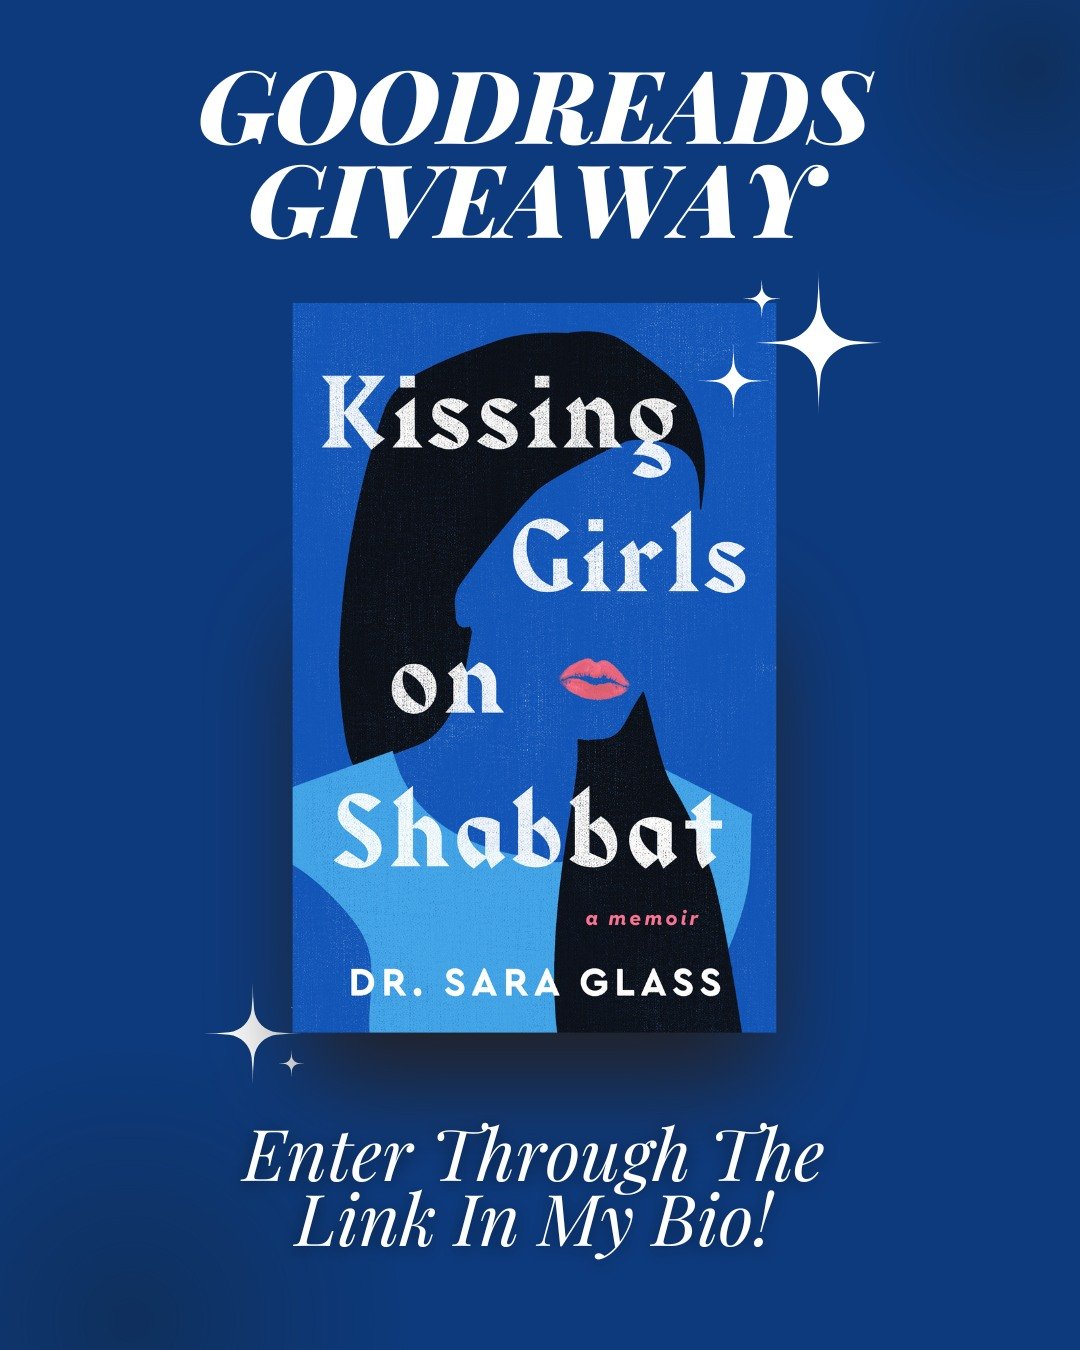 🛑Stop Scrolling!🛑

Have you entered in my @goodreads giveaway yet?

Use the link in my bio to enter for a chance to win a FREE copy of Kissing Girls on Shabbat! 

The only requirements are that you have a Goodreads account and that you live in the 